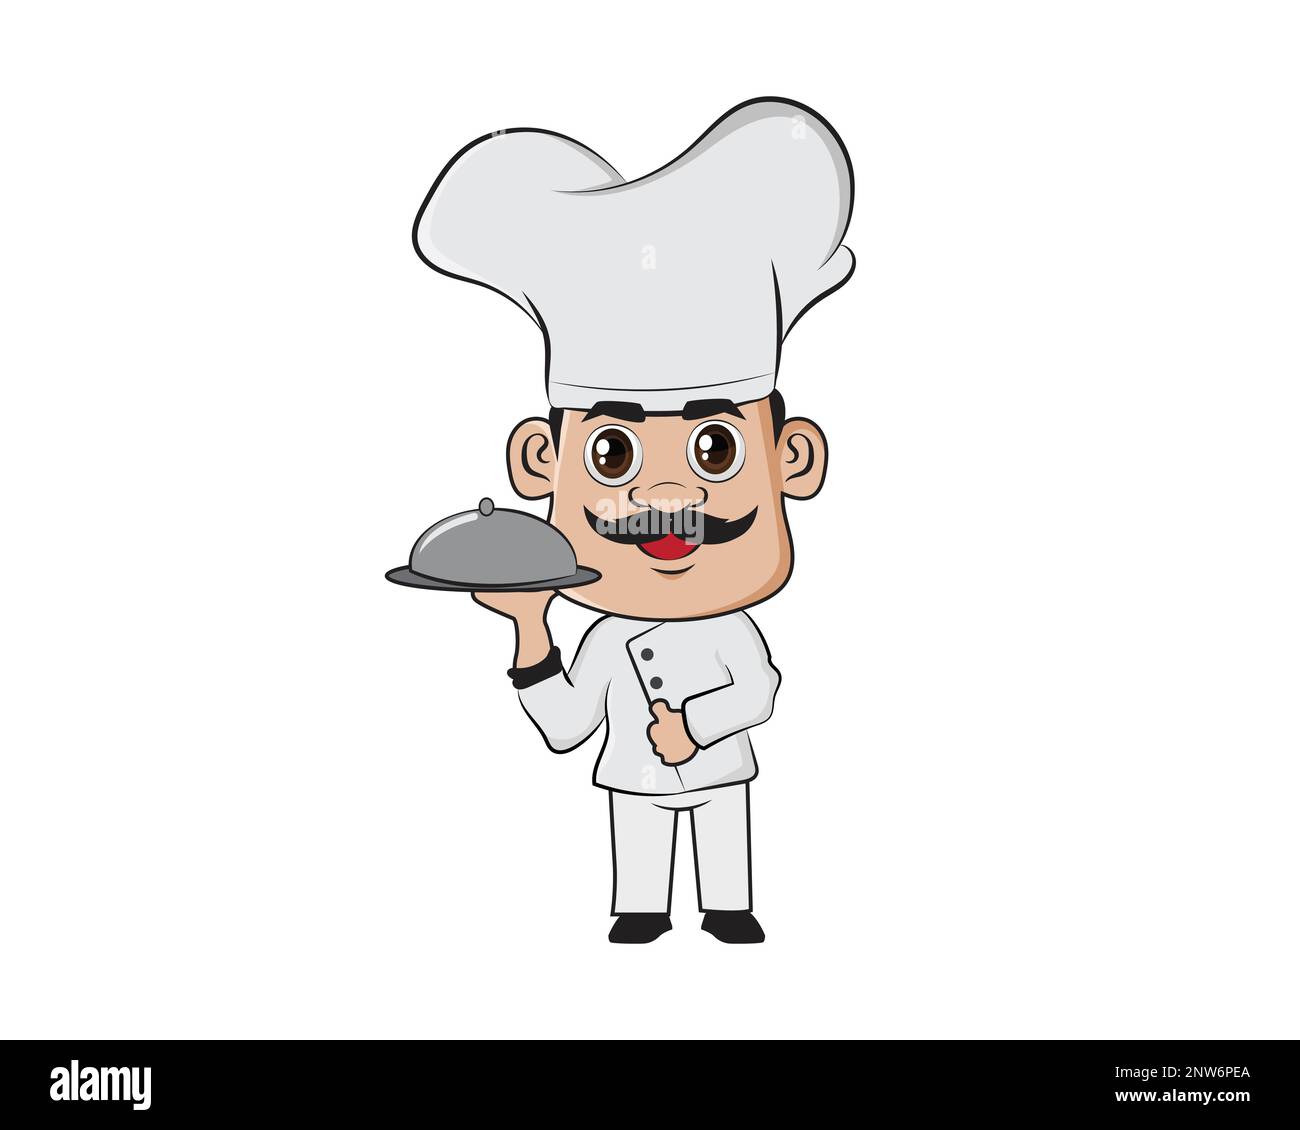 Happy Chef Holding and Serving Dish Illustration with Cartoon Style Stock Vector